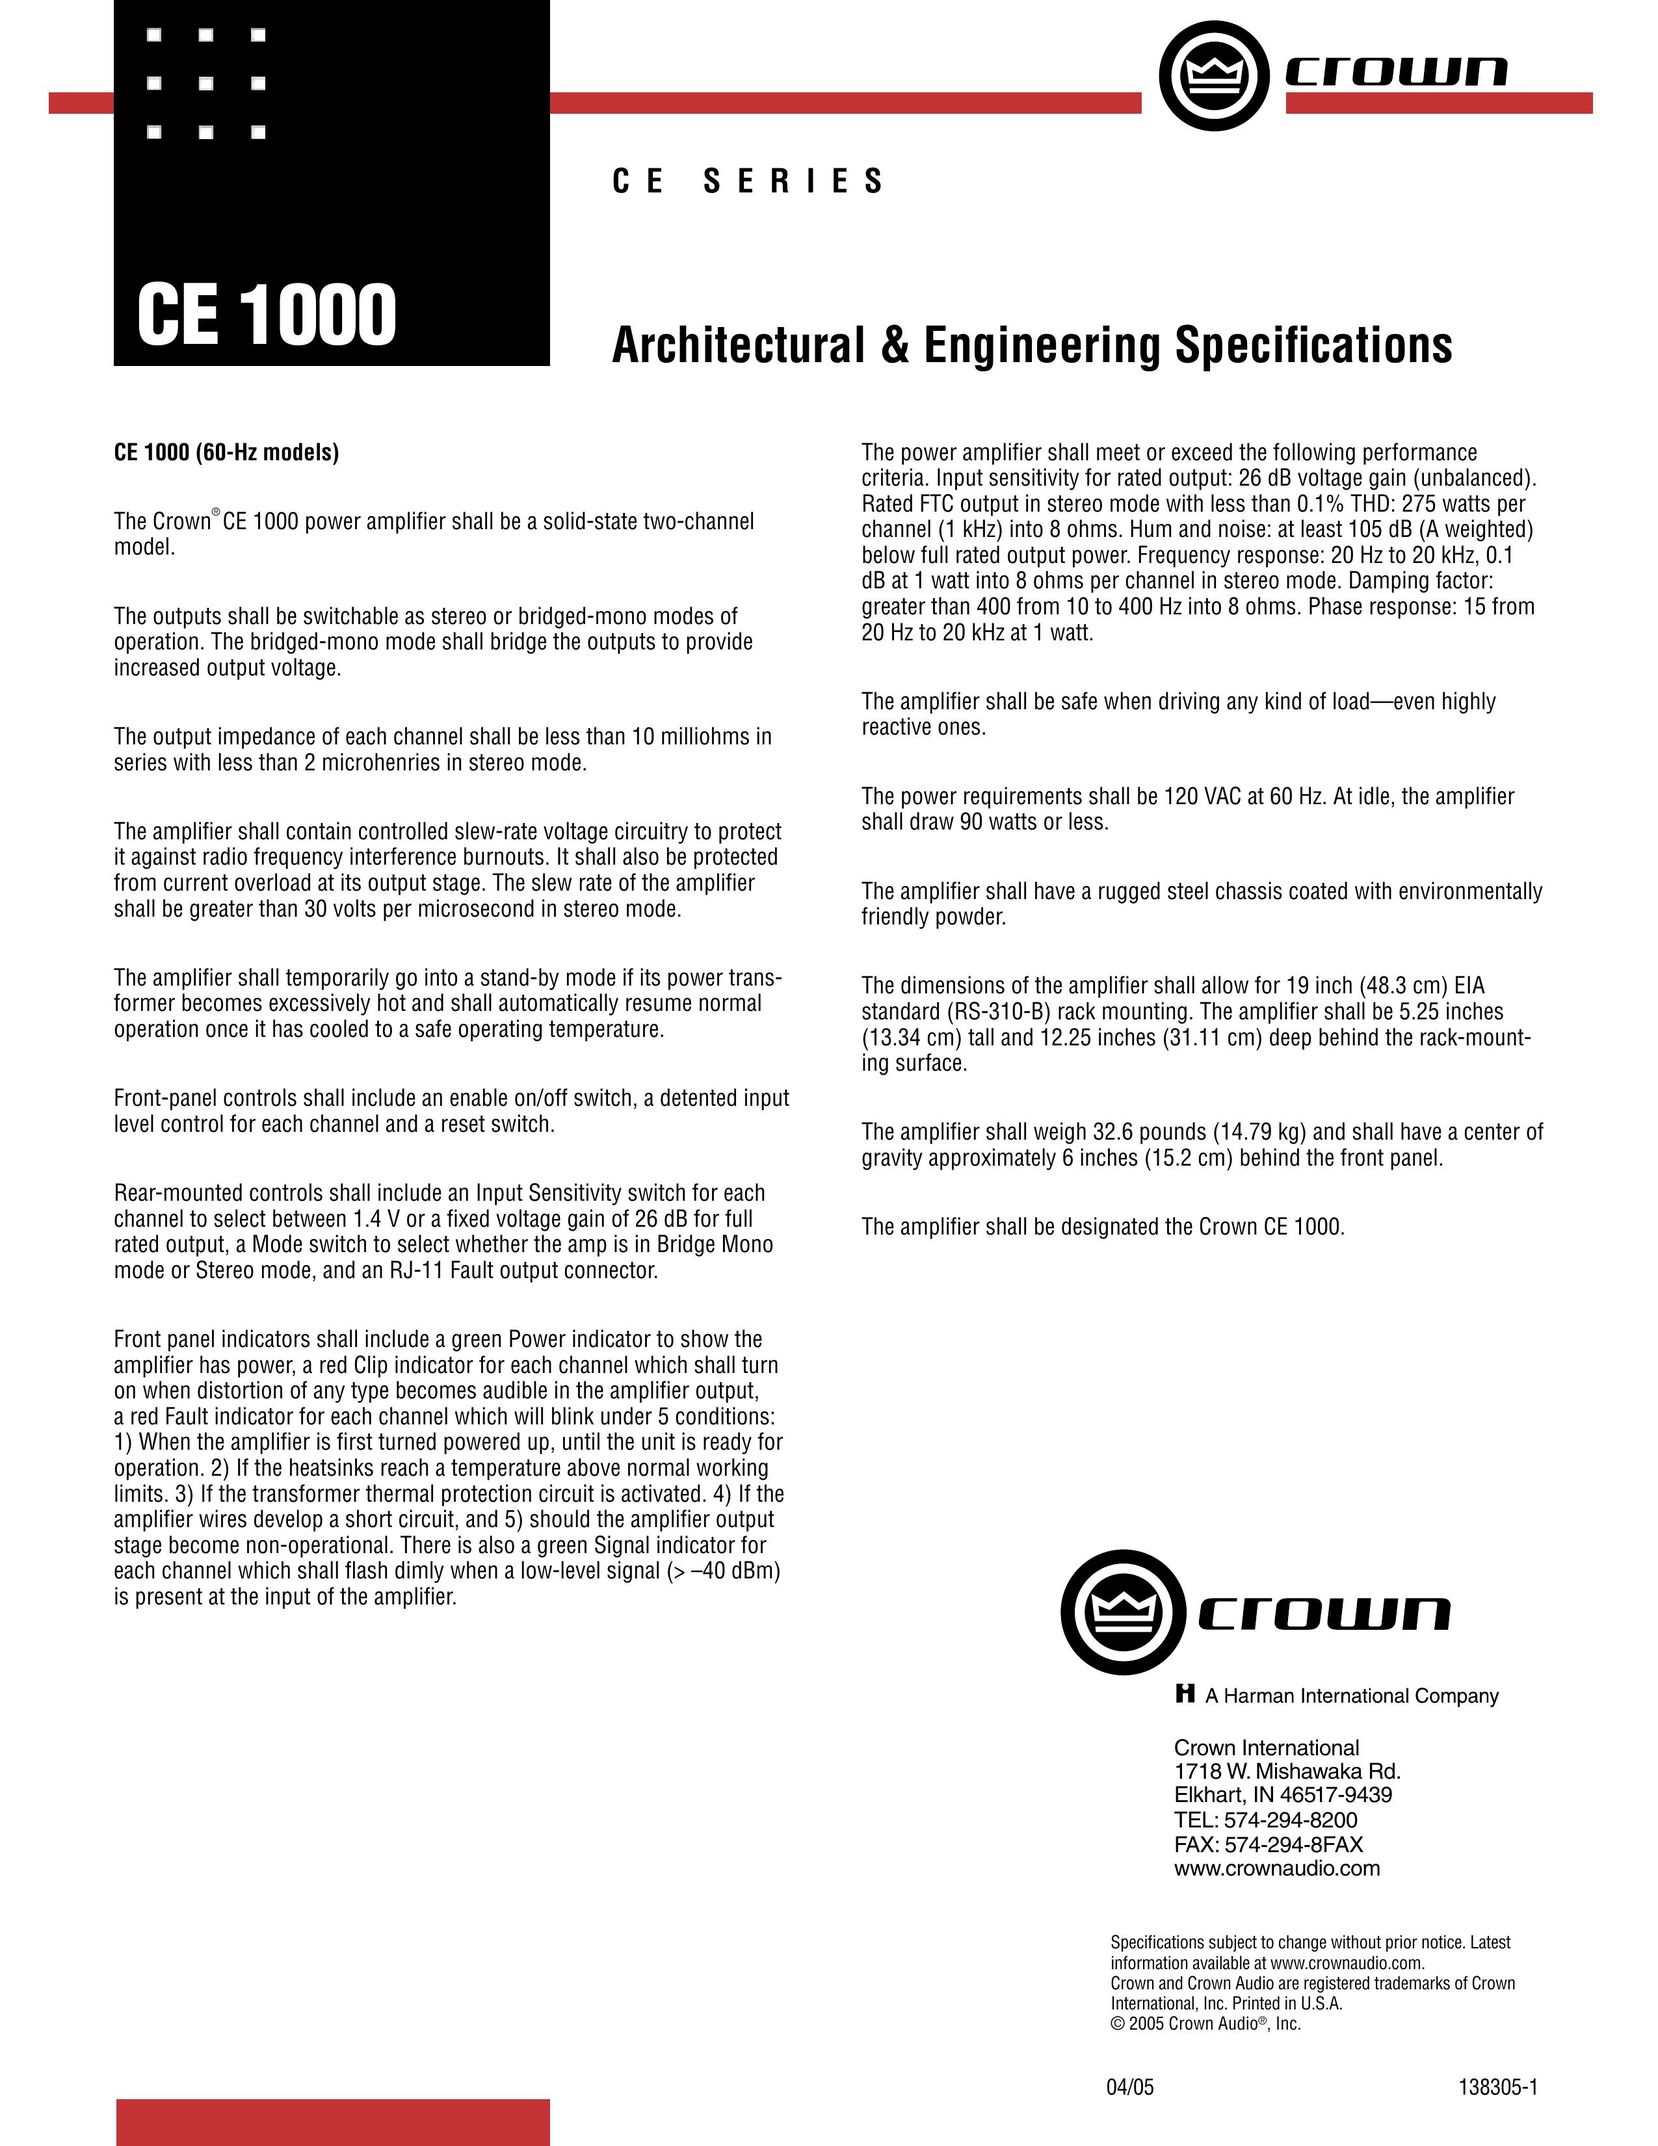 Crown Audio CE 1000 A. & E. Stereo Amplifier User Manual